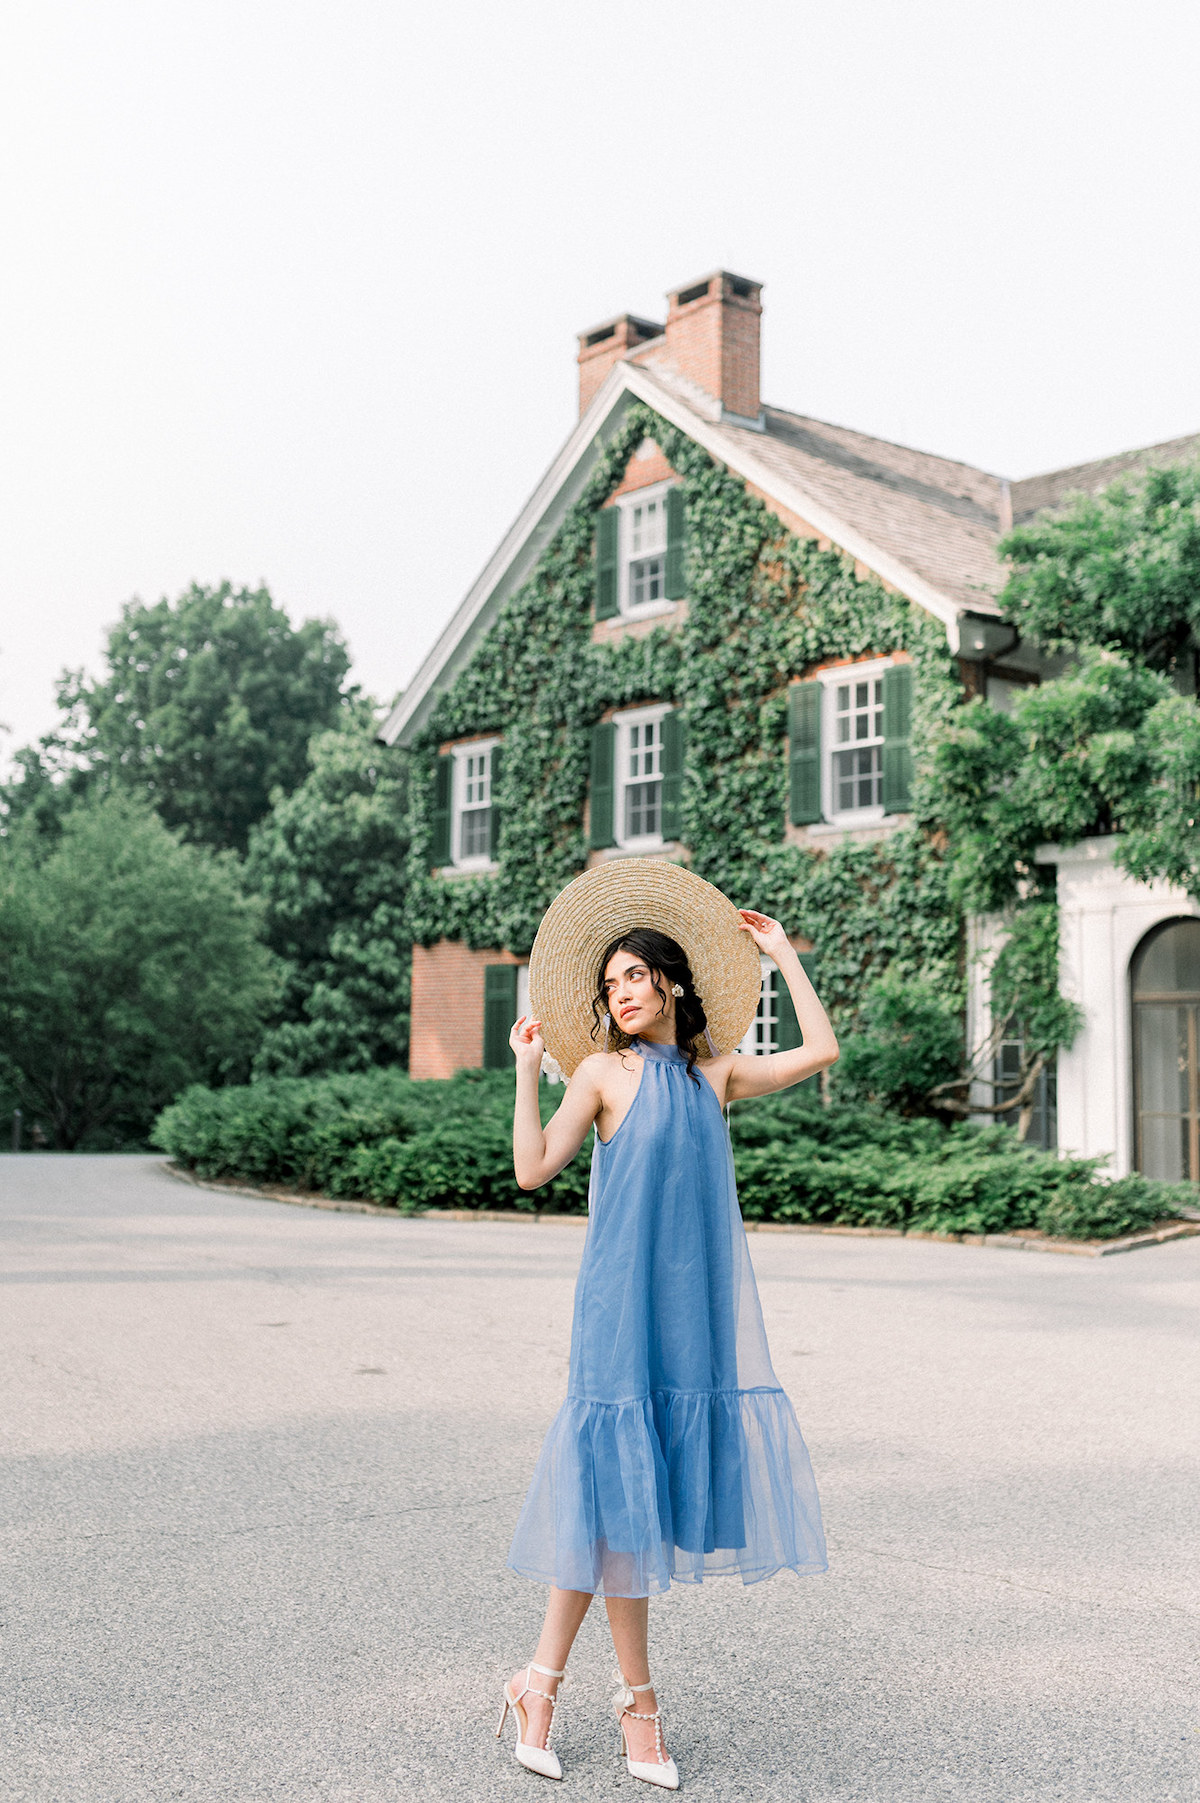 Bride exudes timeless elegance as she poses in front of a historic house at Longwood Gardens, dressed in the Anthropologie French blue gown and a charming white hydrangea-adorned hat.